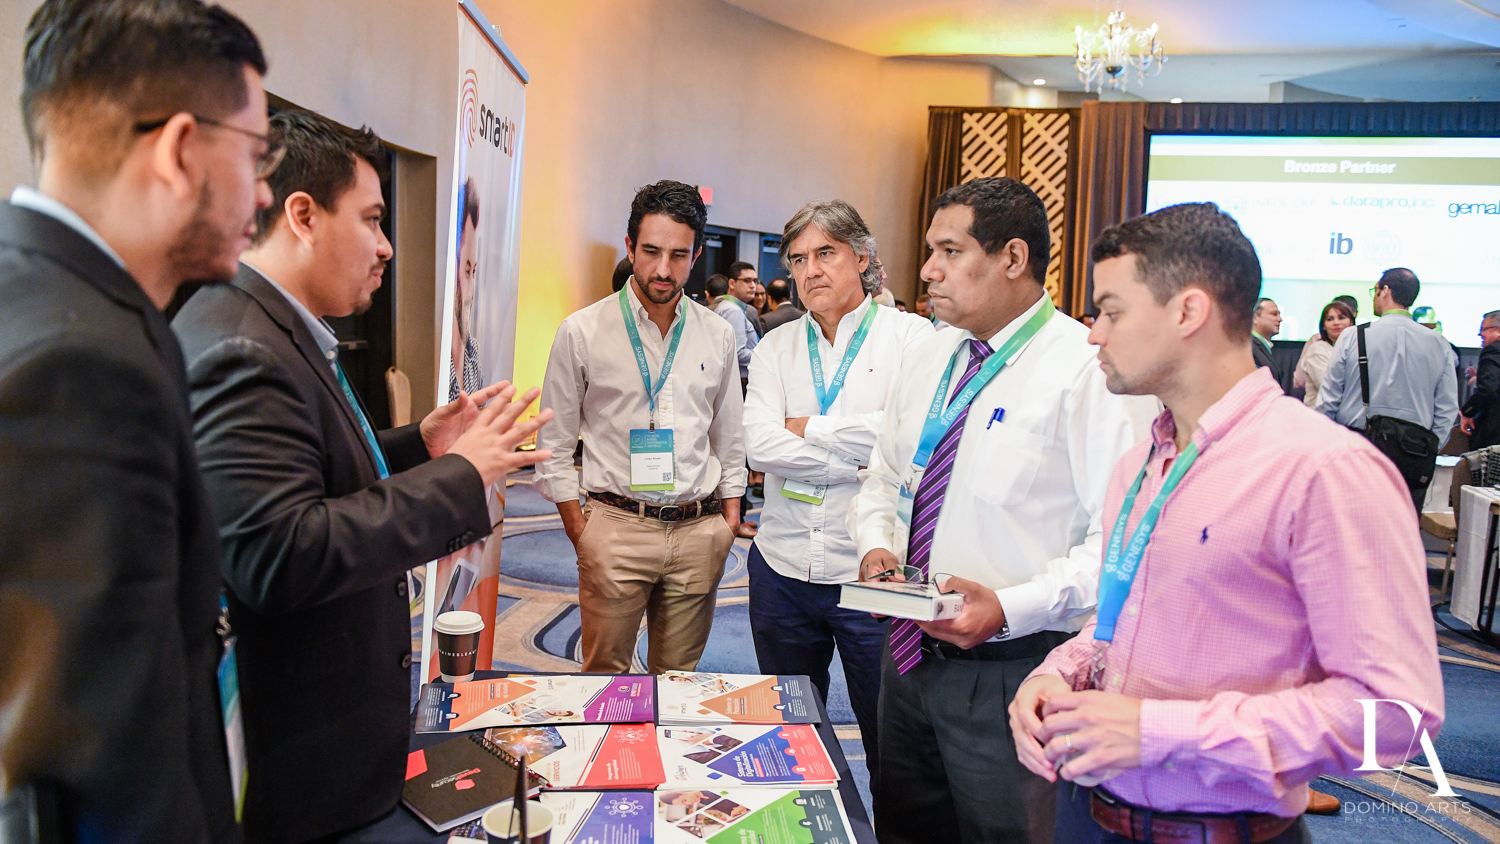 Corporate Event Conference Photography of Fintech Americas at Fontainebleau Miami Beach Florida